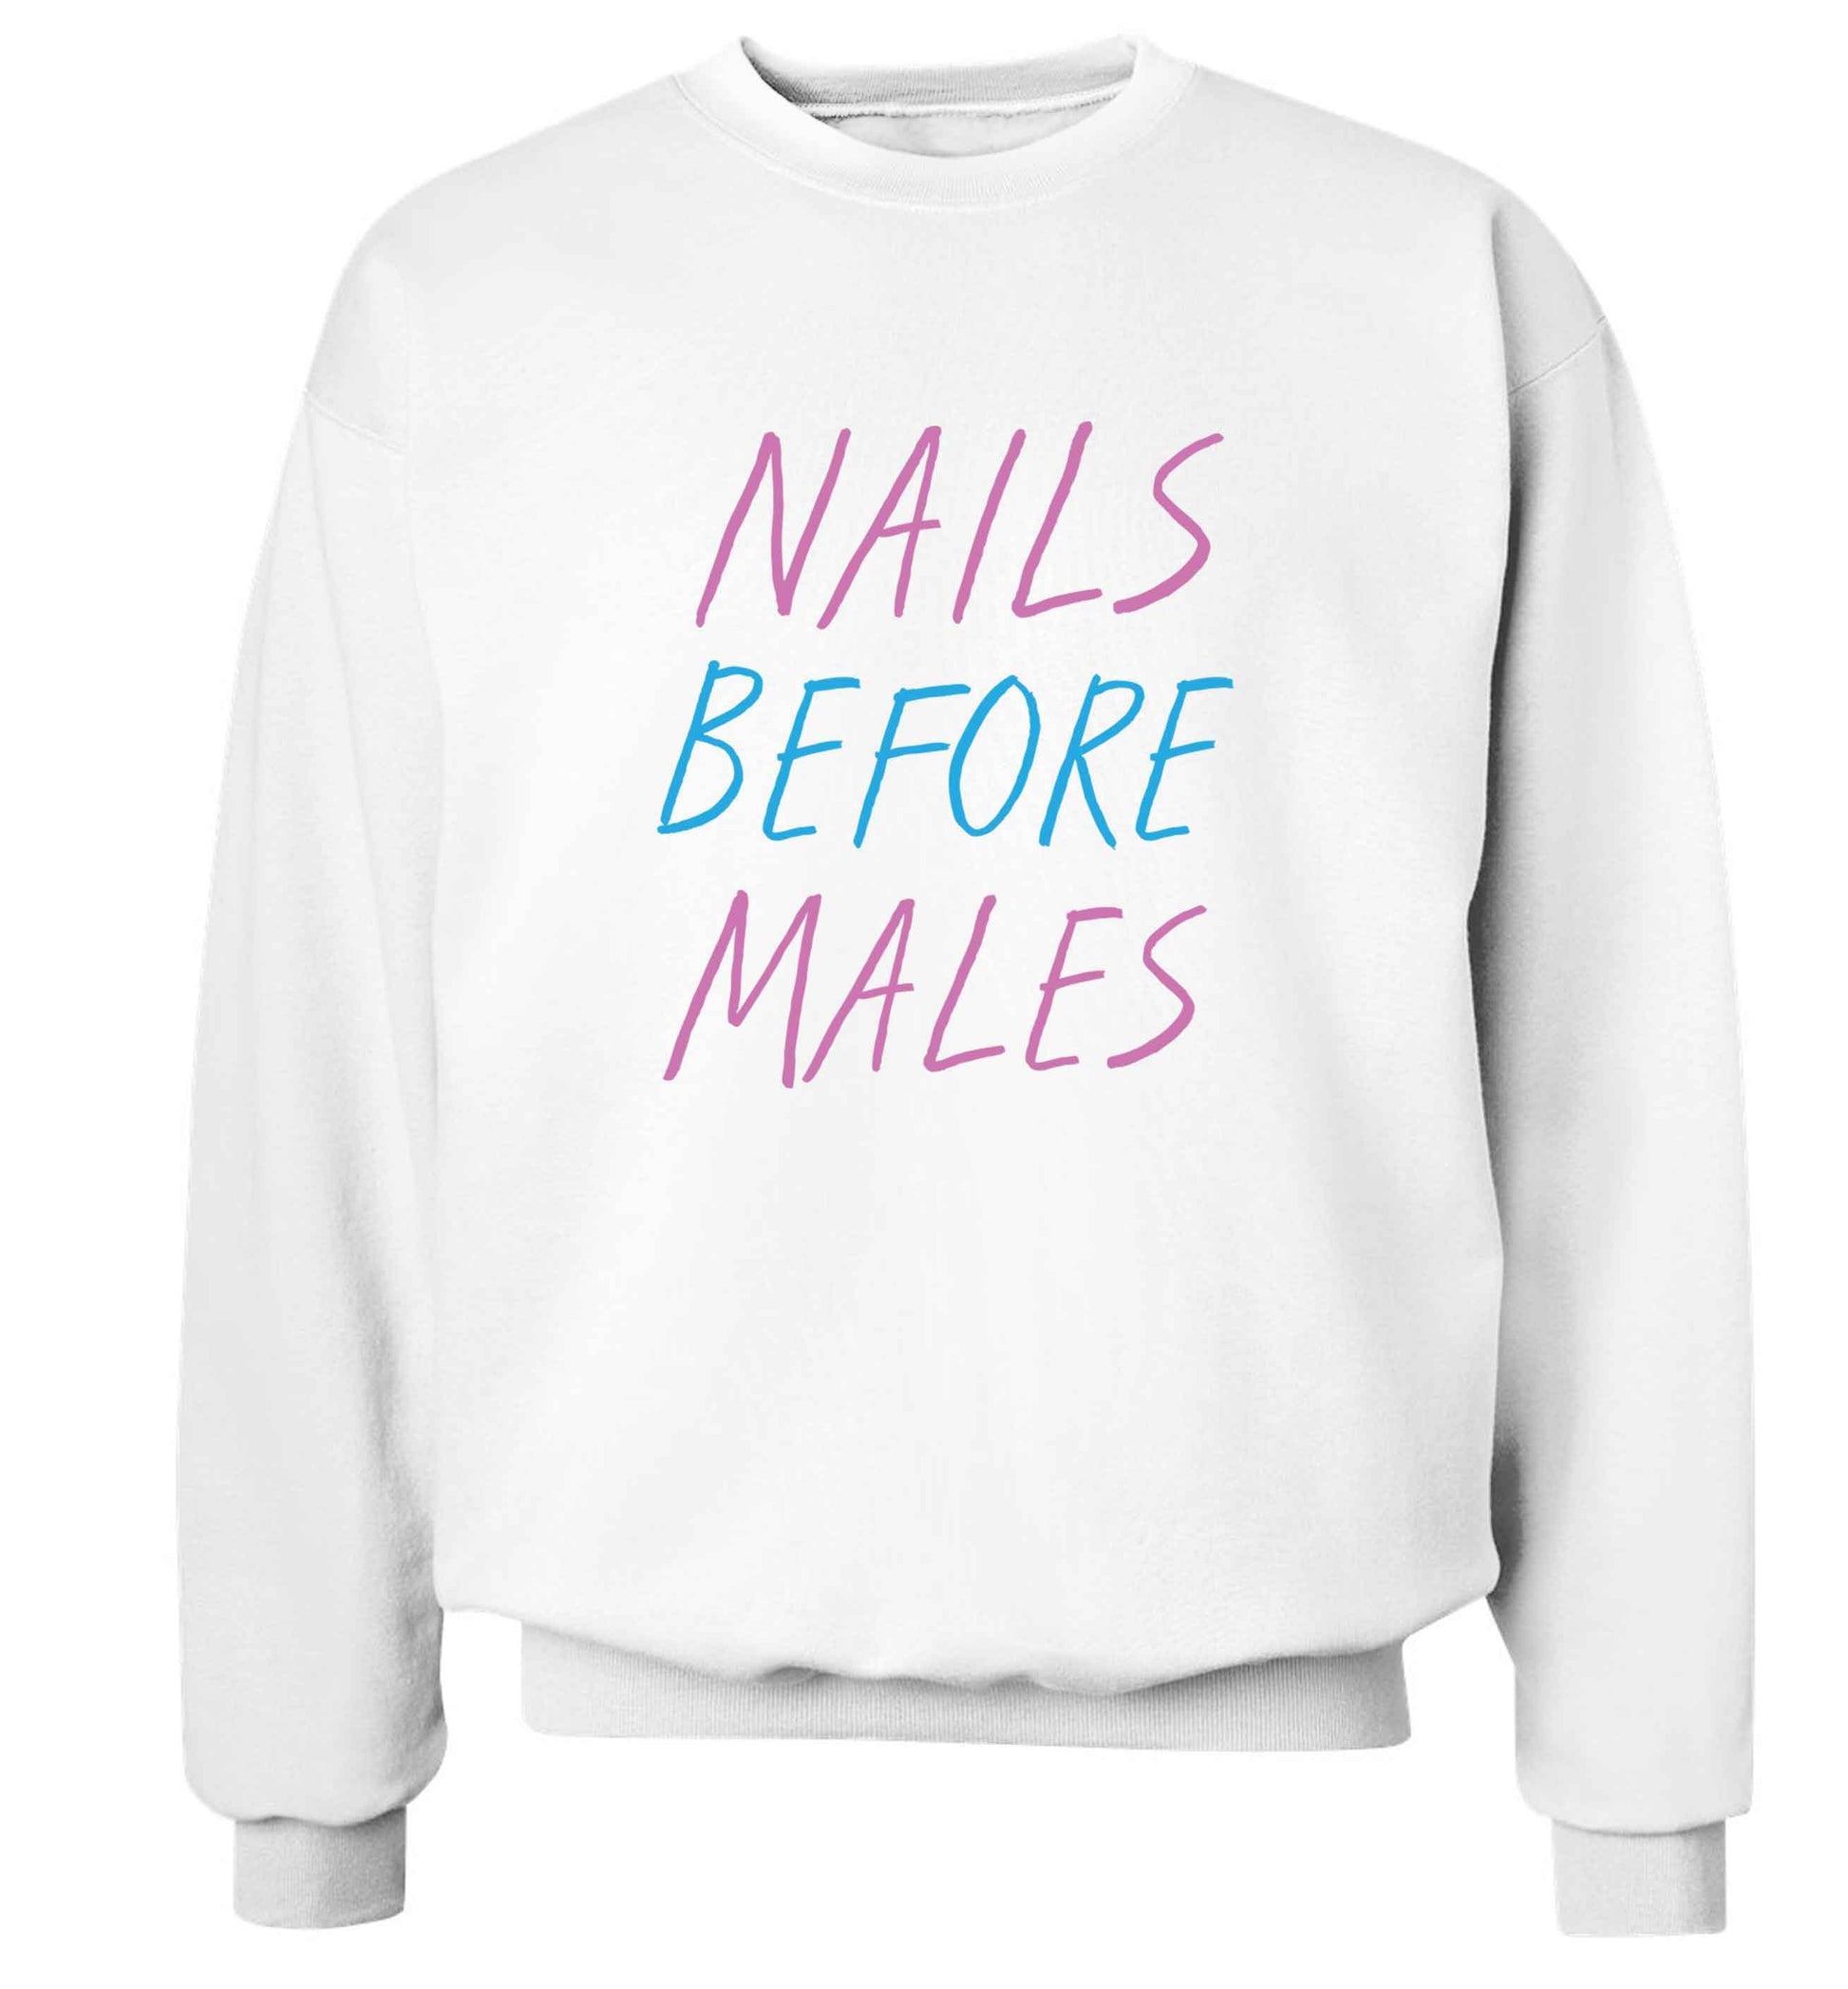 Nails before males adult's unisex white sweater 2XL